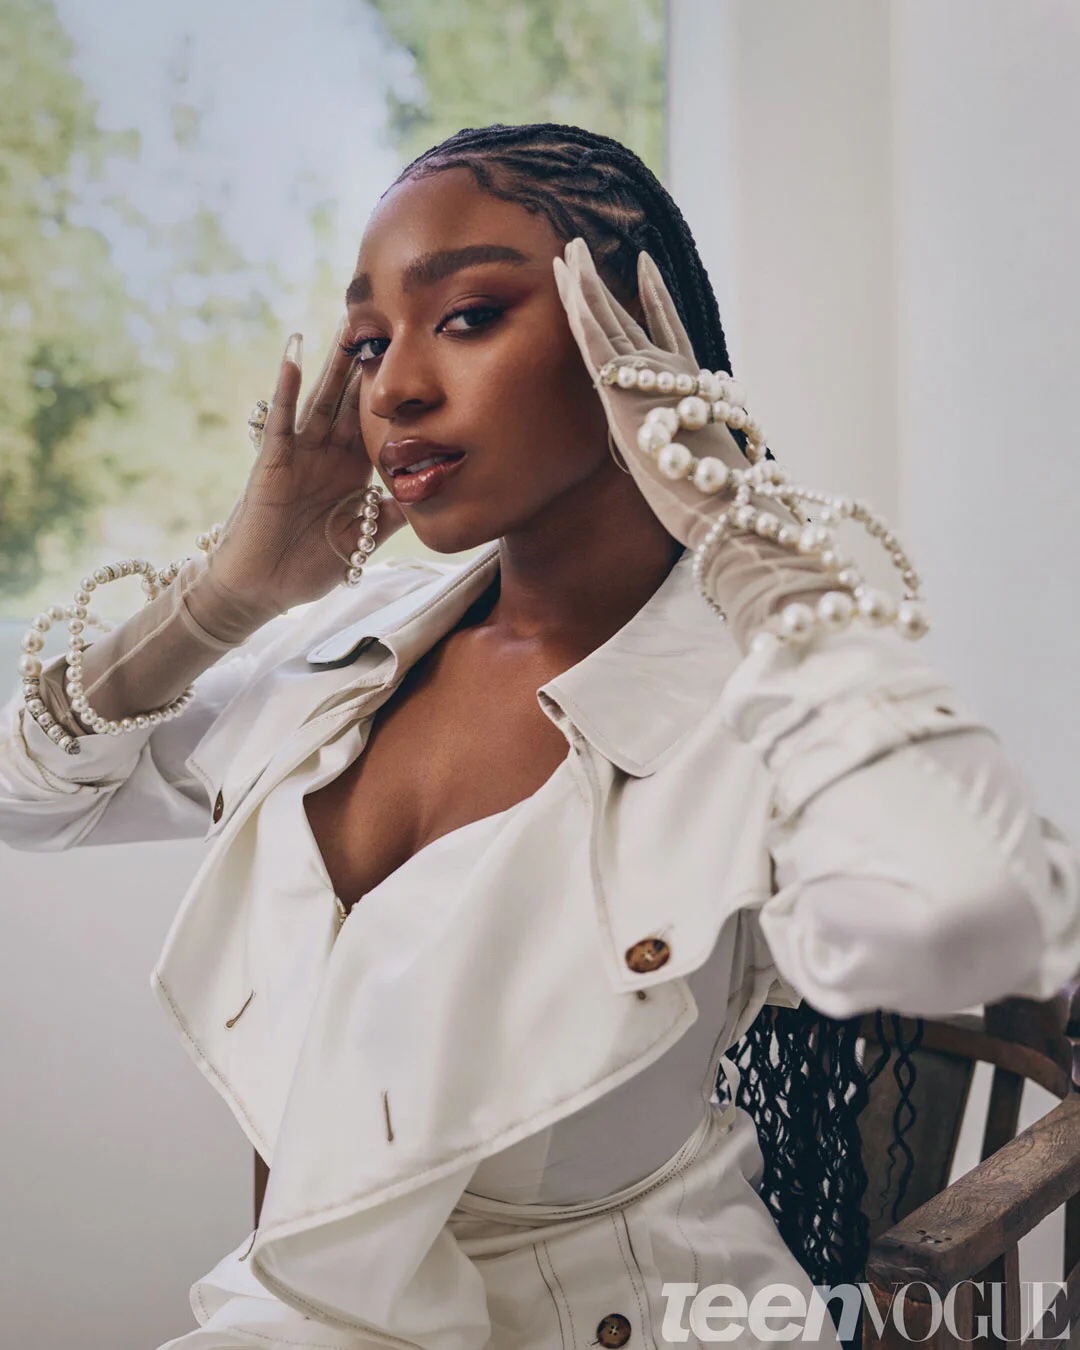 Normani-Teen-Vogue-October-issue-cover